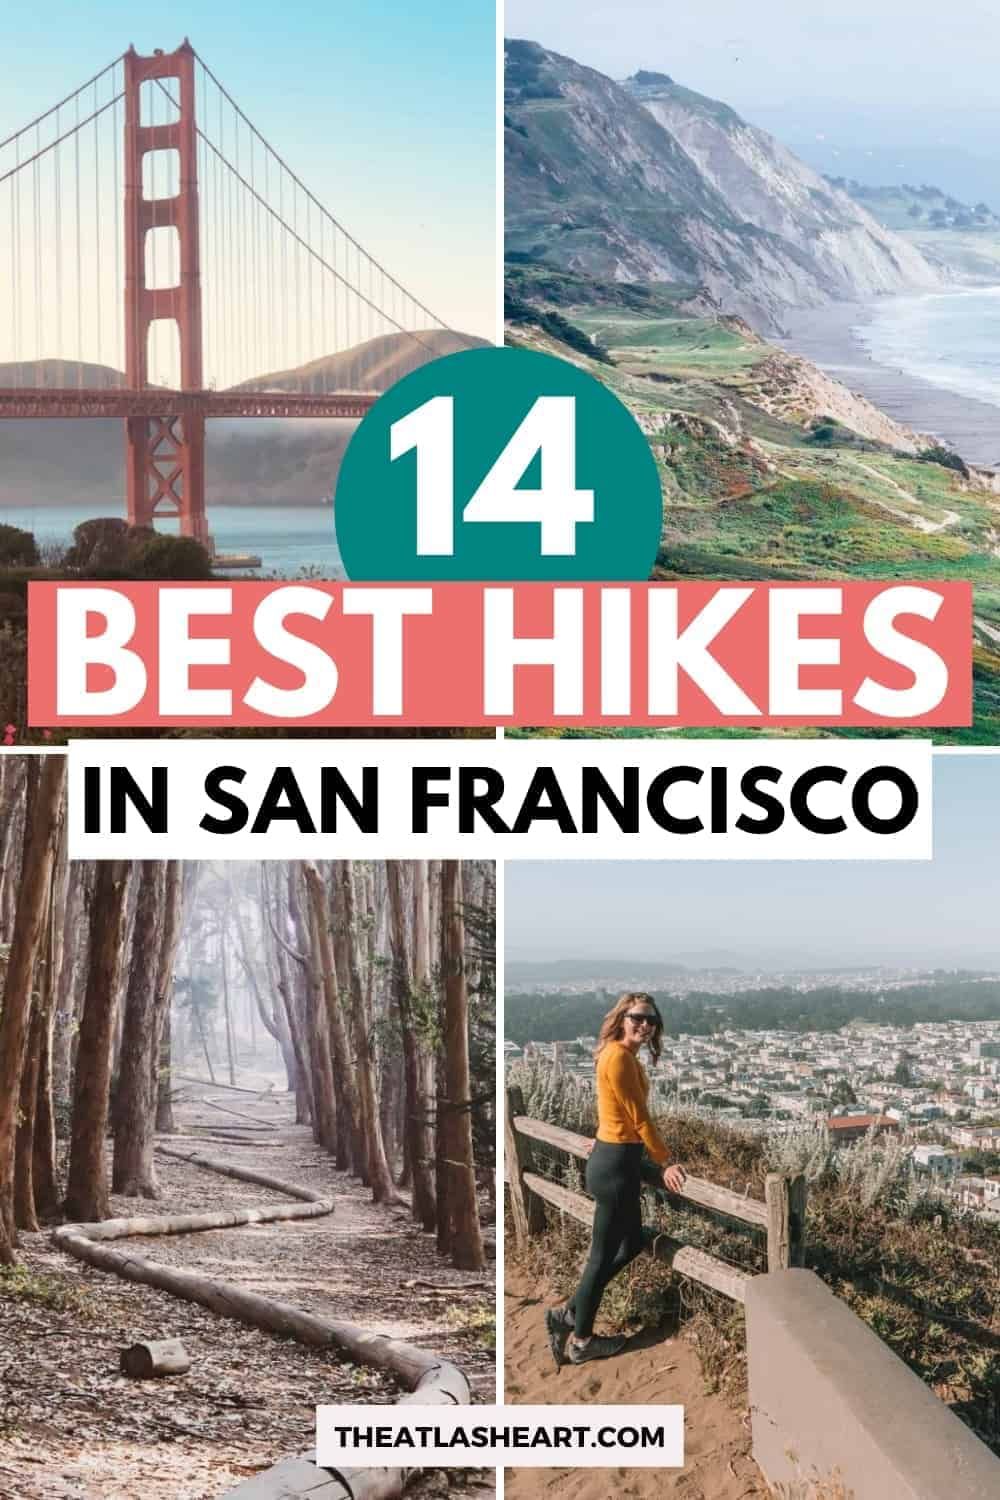 14 Best Hikes in San Francisco, California (From a Local)